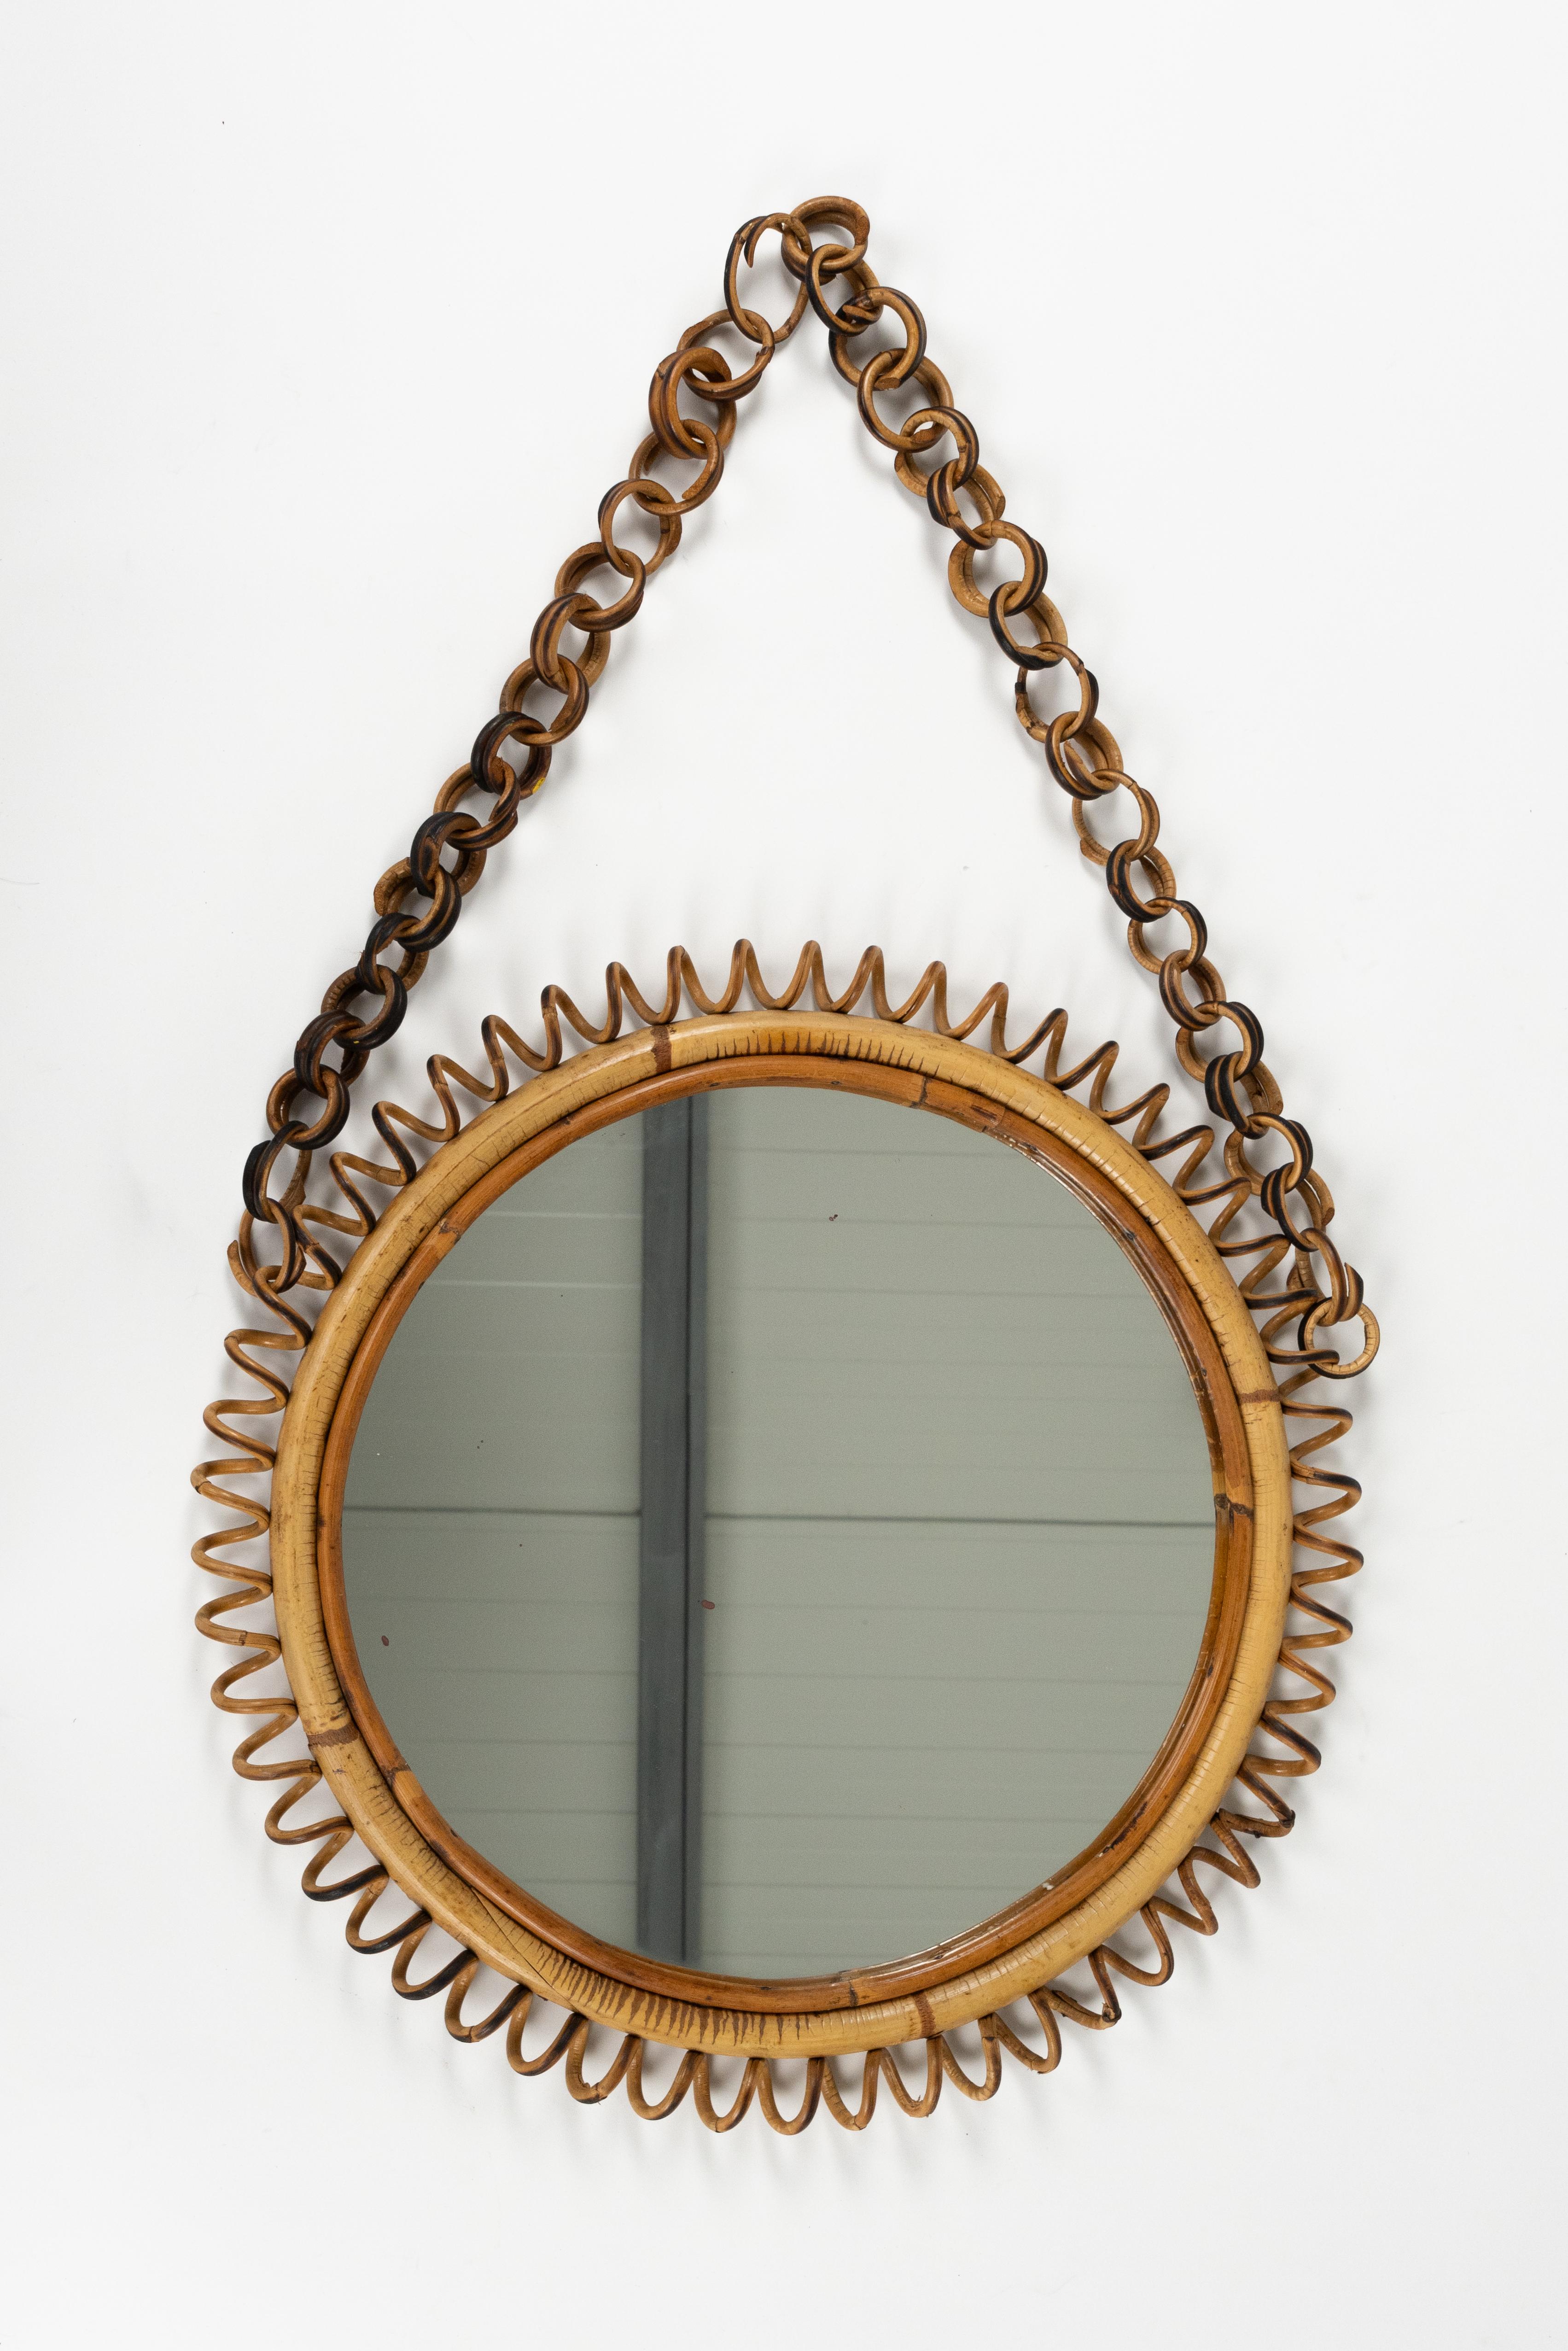 Midcentury beautiful round wall mirror with chain in bamboo and rattan in the style of Franco Albini.   

Made in Italy in the 1960s.   

A highly decorative mirror.   

The mirror, original of the period, shows small signs of discolouration.